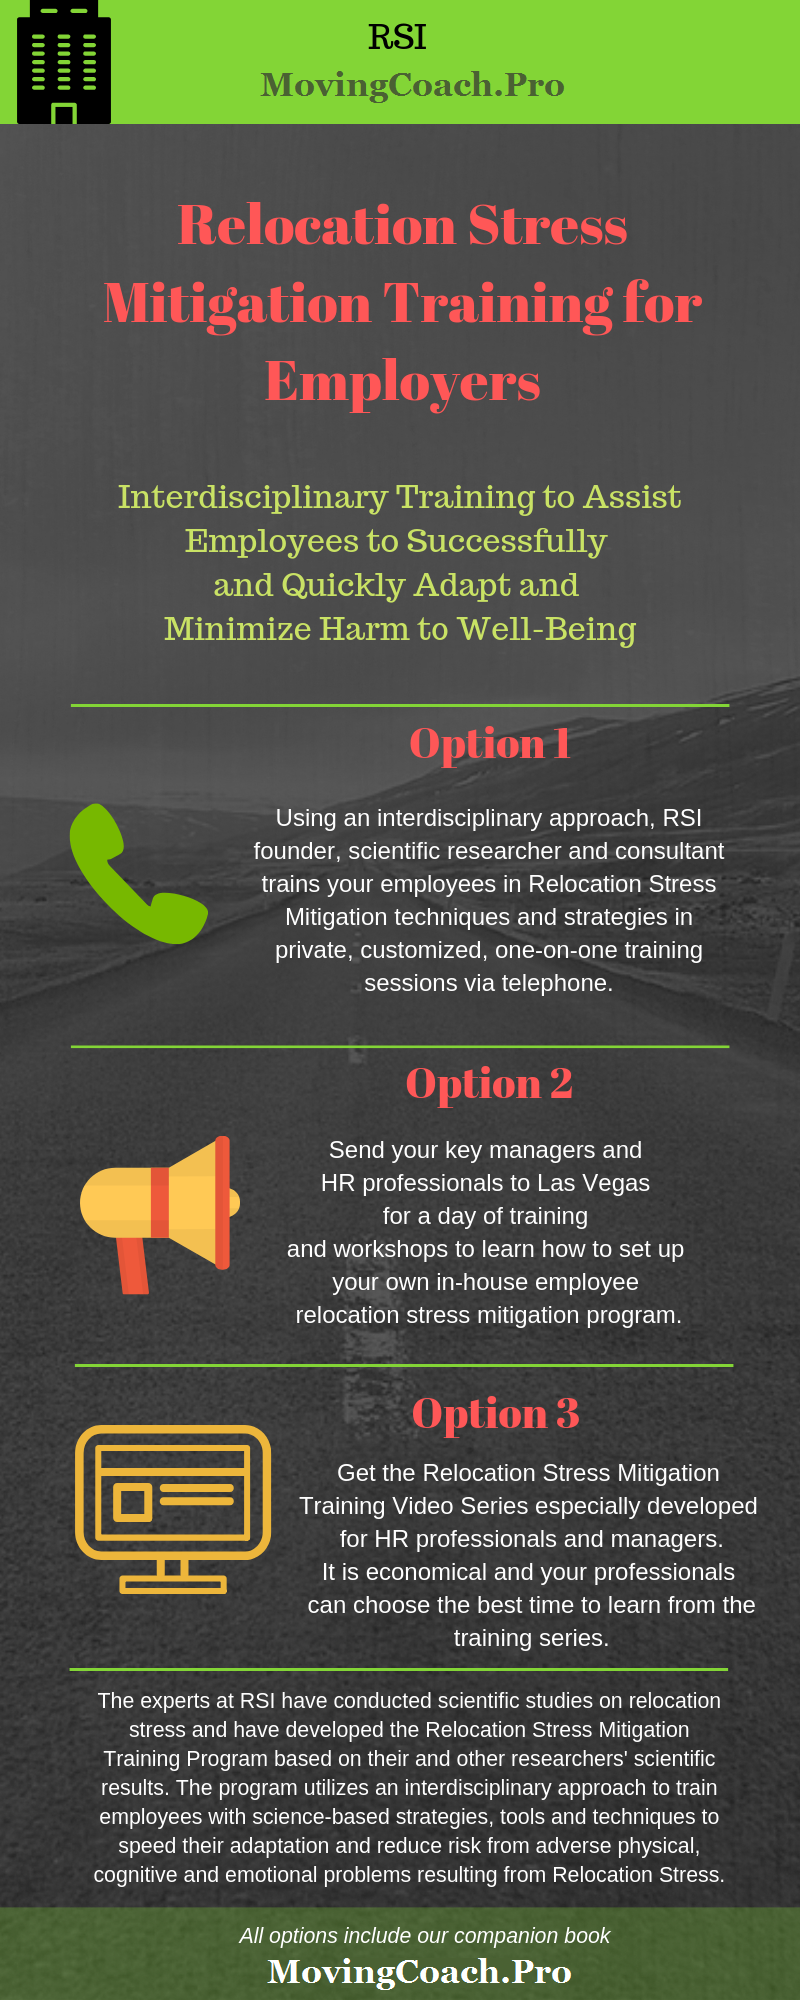 ReloStress TRAINING Options Infographic